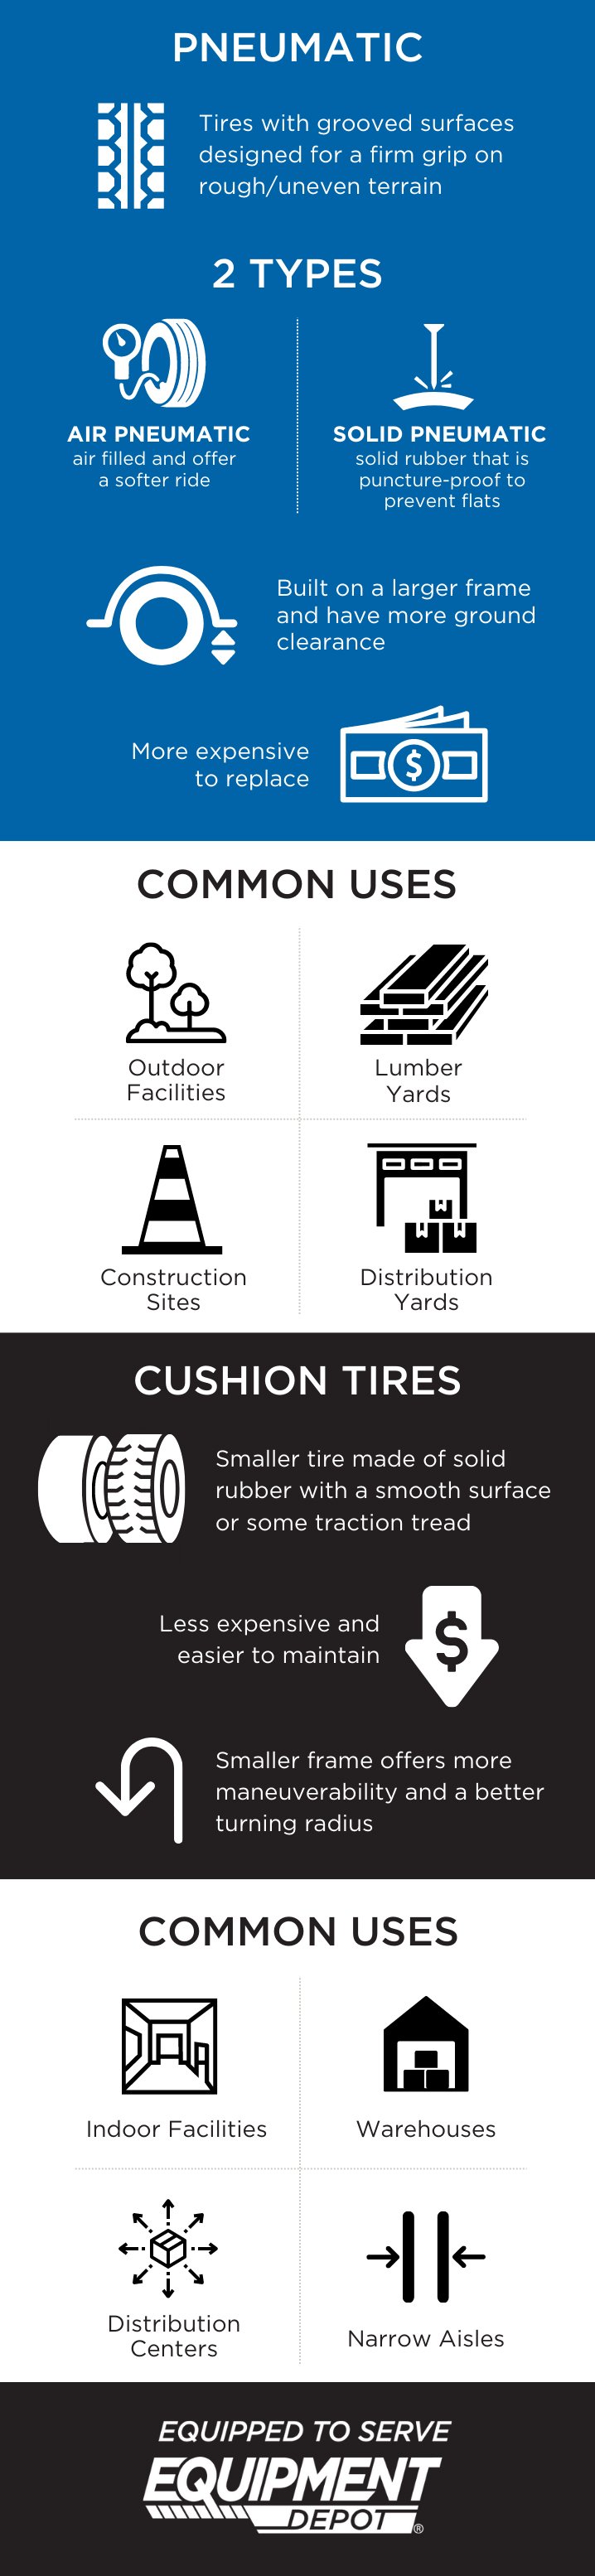 Pneumatic-VS-Cushion-Tires-Infographic-Body